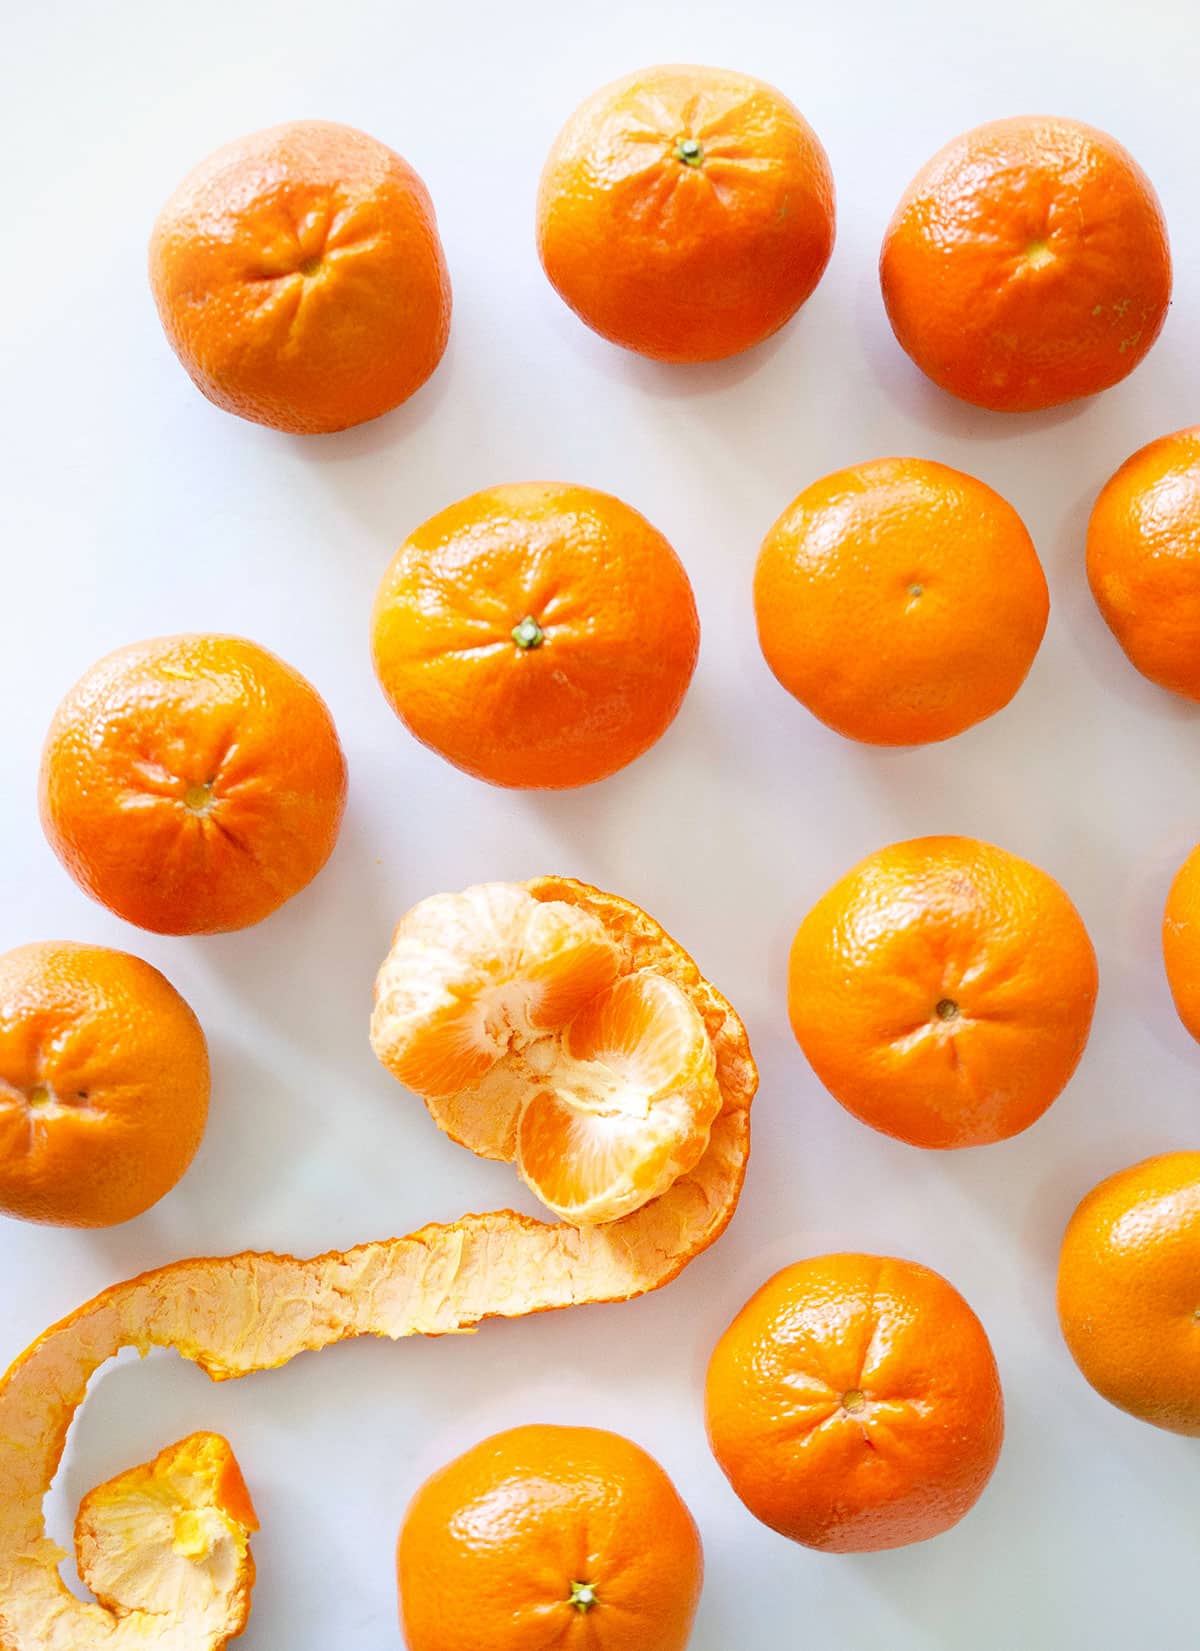 Many oranges on a gray background.